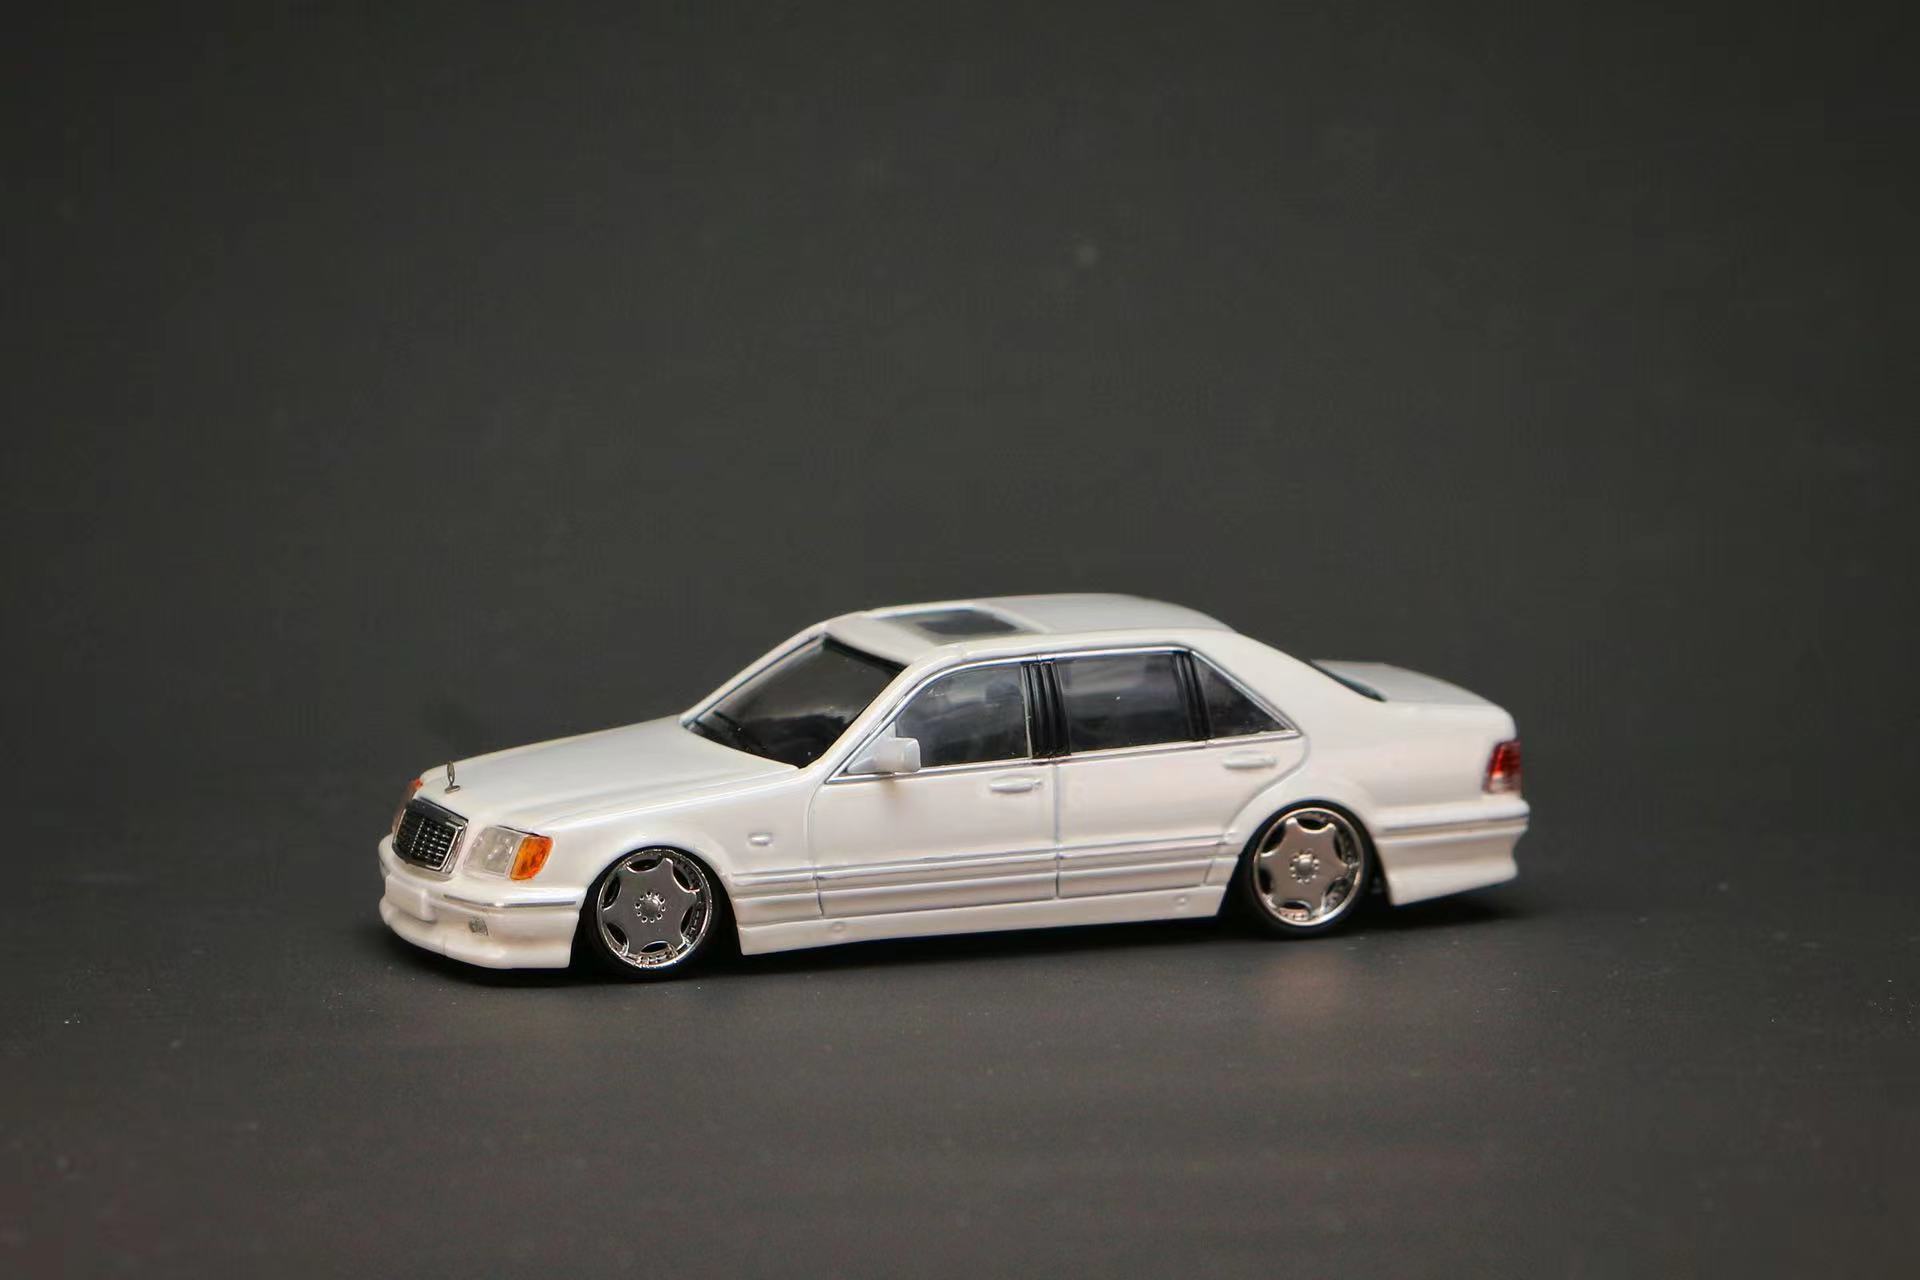 Stocks Street Weapon 1:64 Benz W140 Diecast Model Car White Color Blue In August 2022 alx